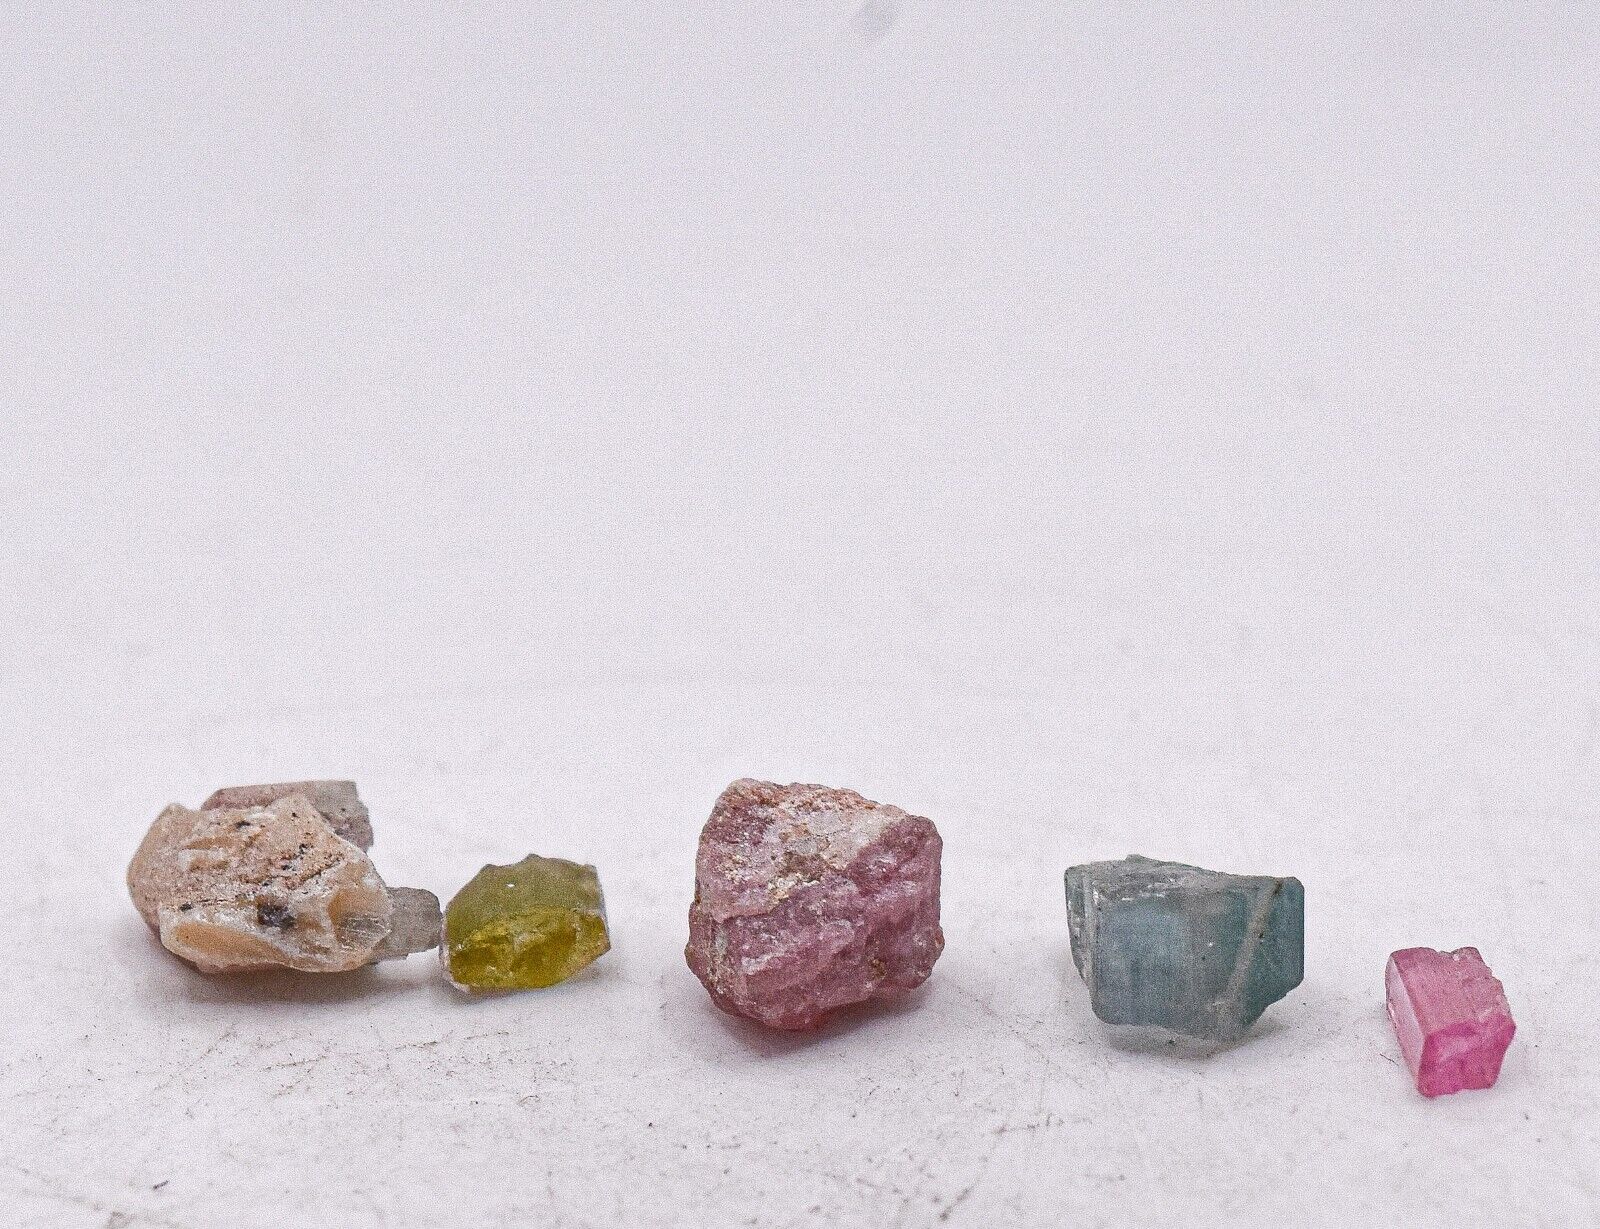 8.5ct 5pcs Pink Green Blue Tourmaline Rough Crystal Mineral Stones - Afghanistan